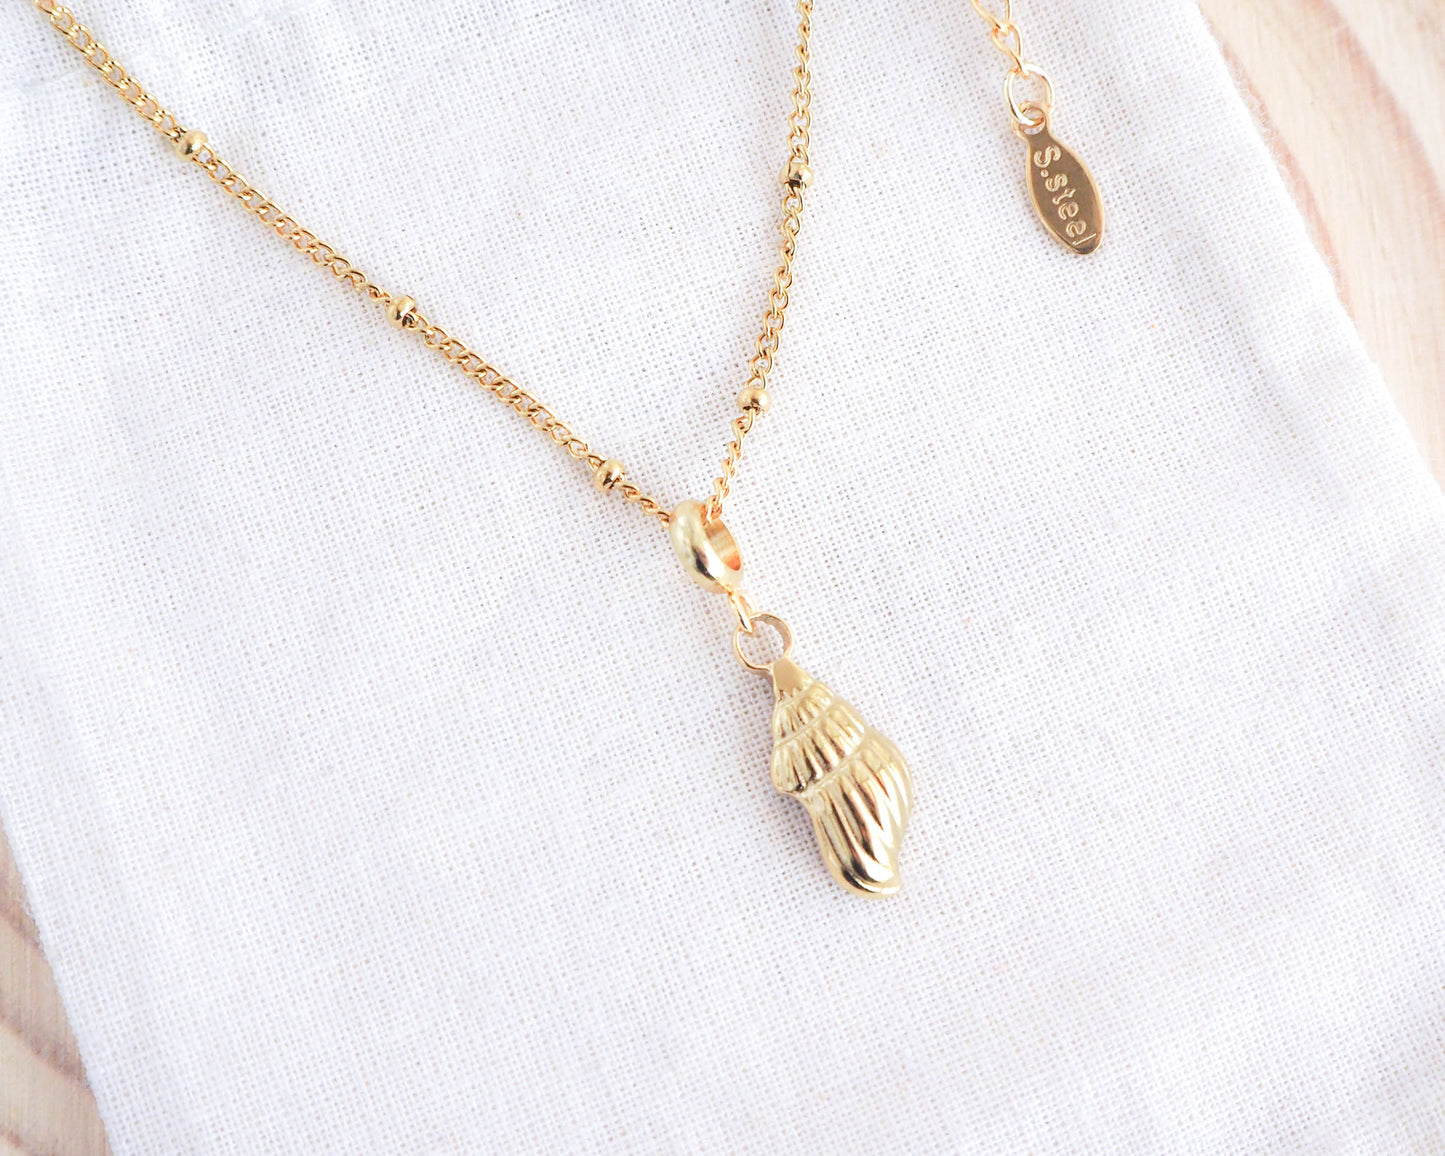 Gold Conch Shell Pendant Necklace Coastal Jewelry Inspired by the Sea, SeabyLou